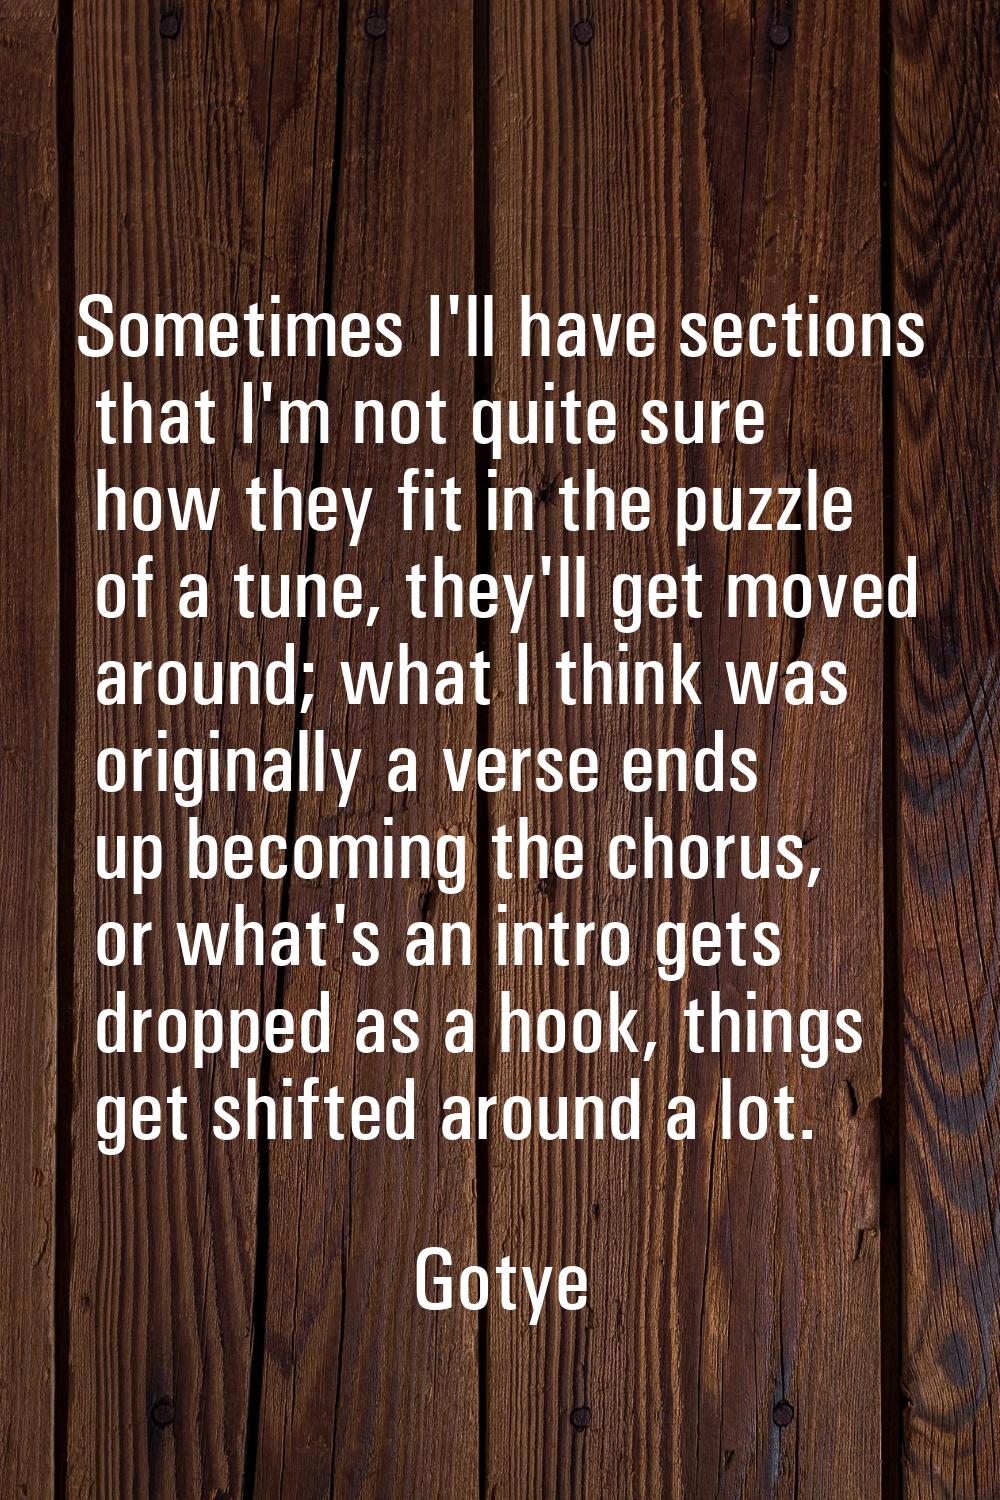 Sometimes I'll have sections that I'm not quite sure how they fit in the puzzle of a tune, they'll 